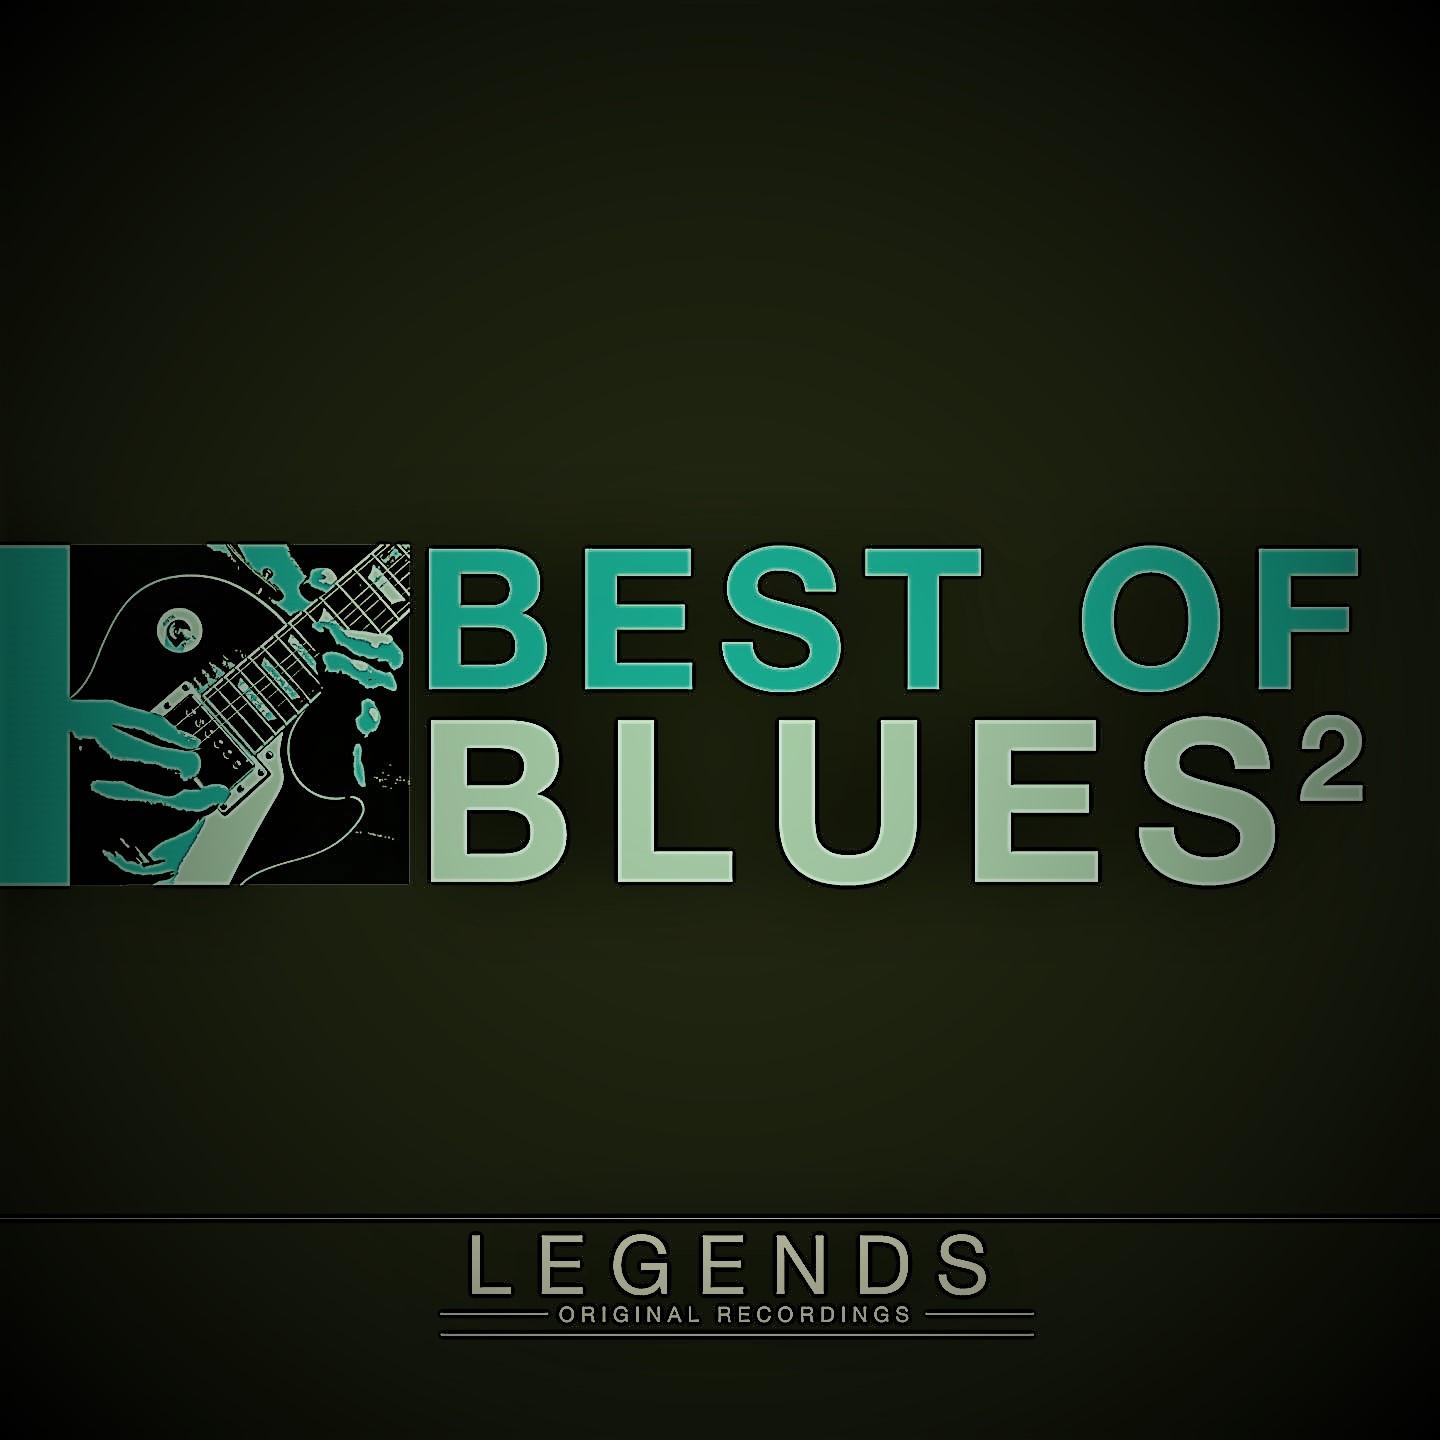 Legends - The Best of Blues, Vol. 2 (Deluxe Edition)